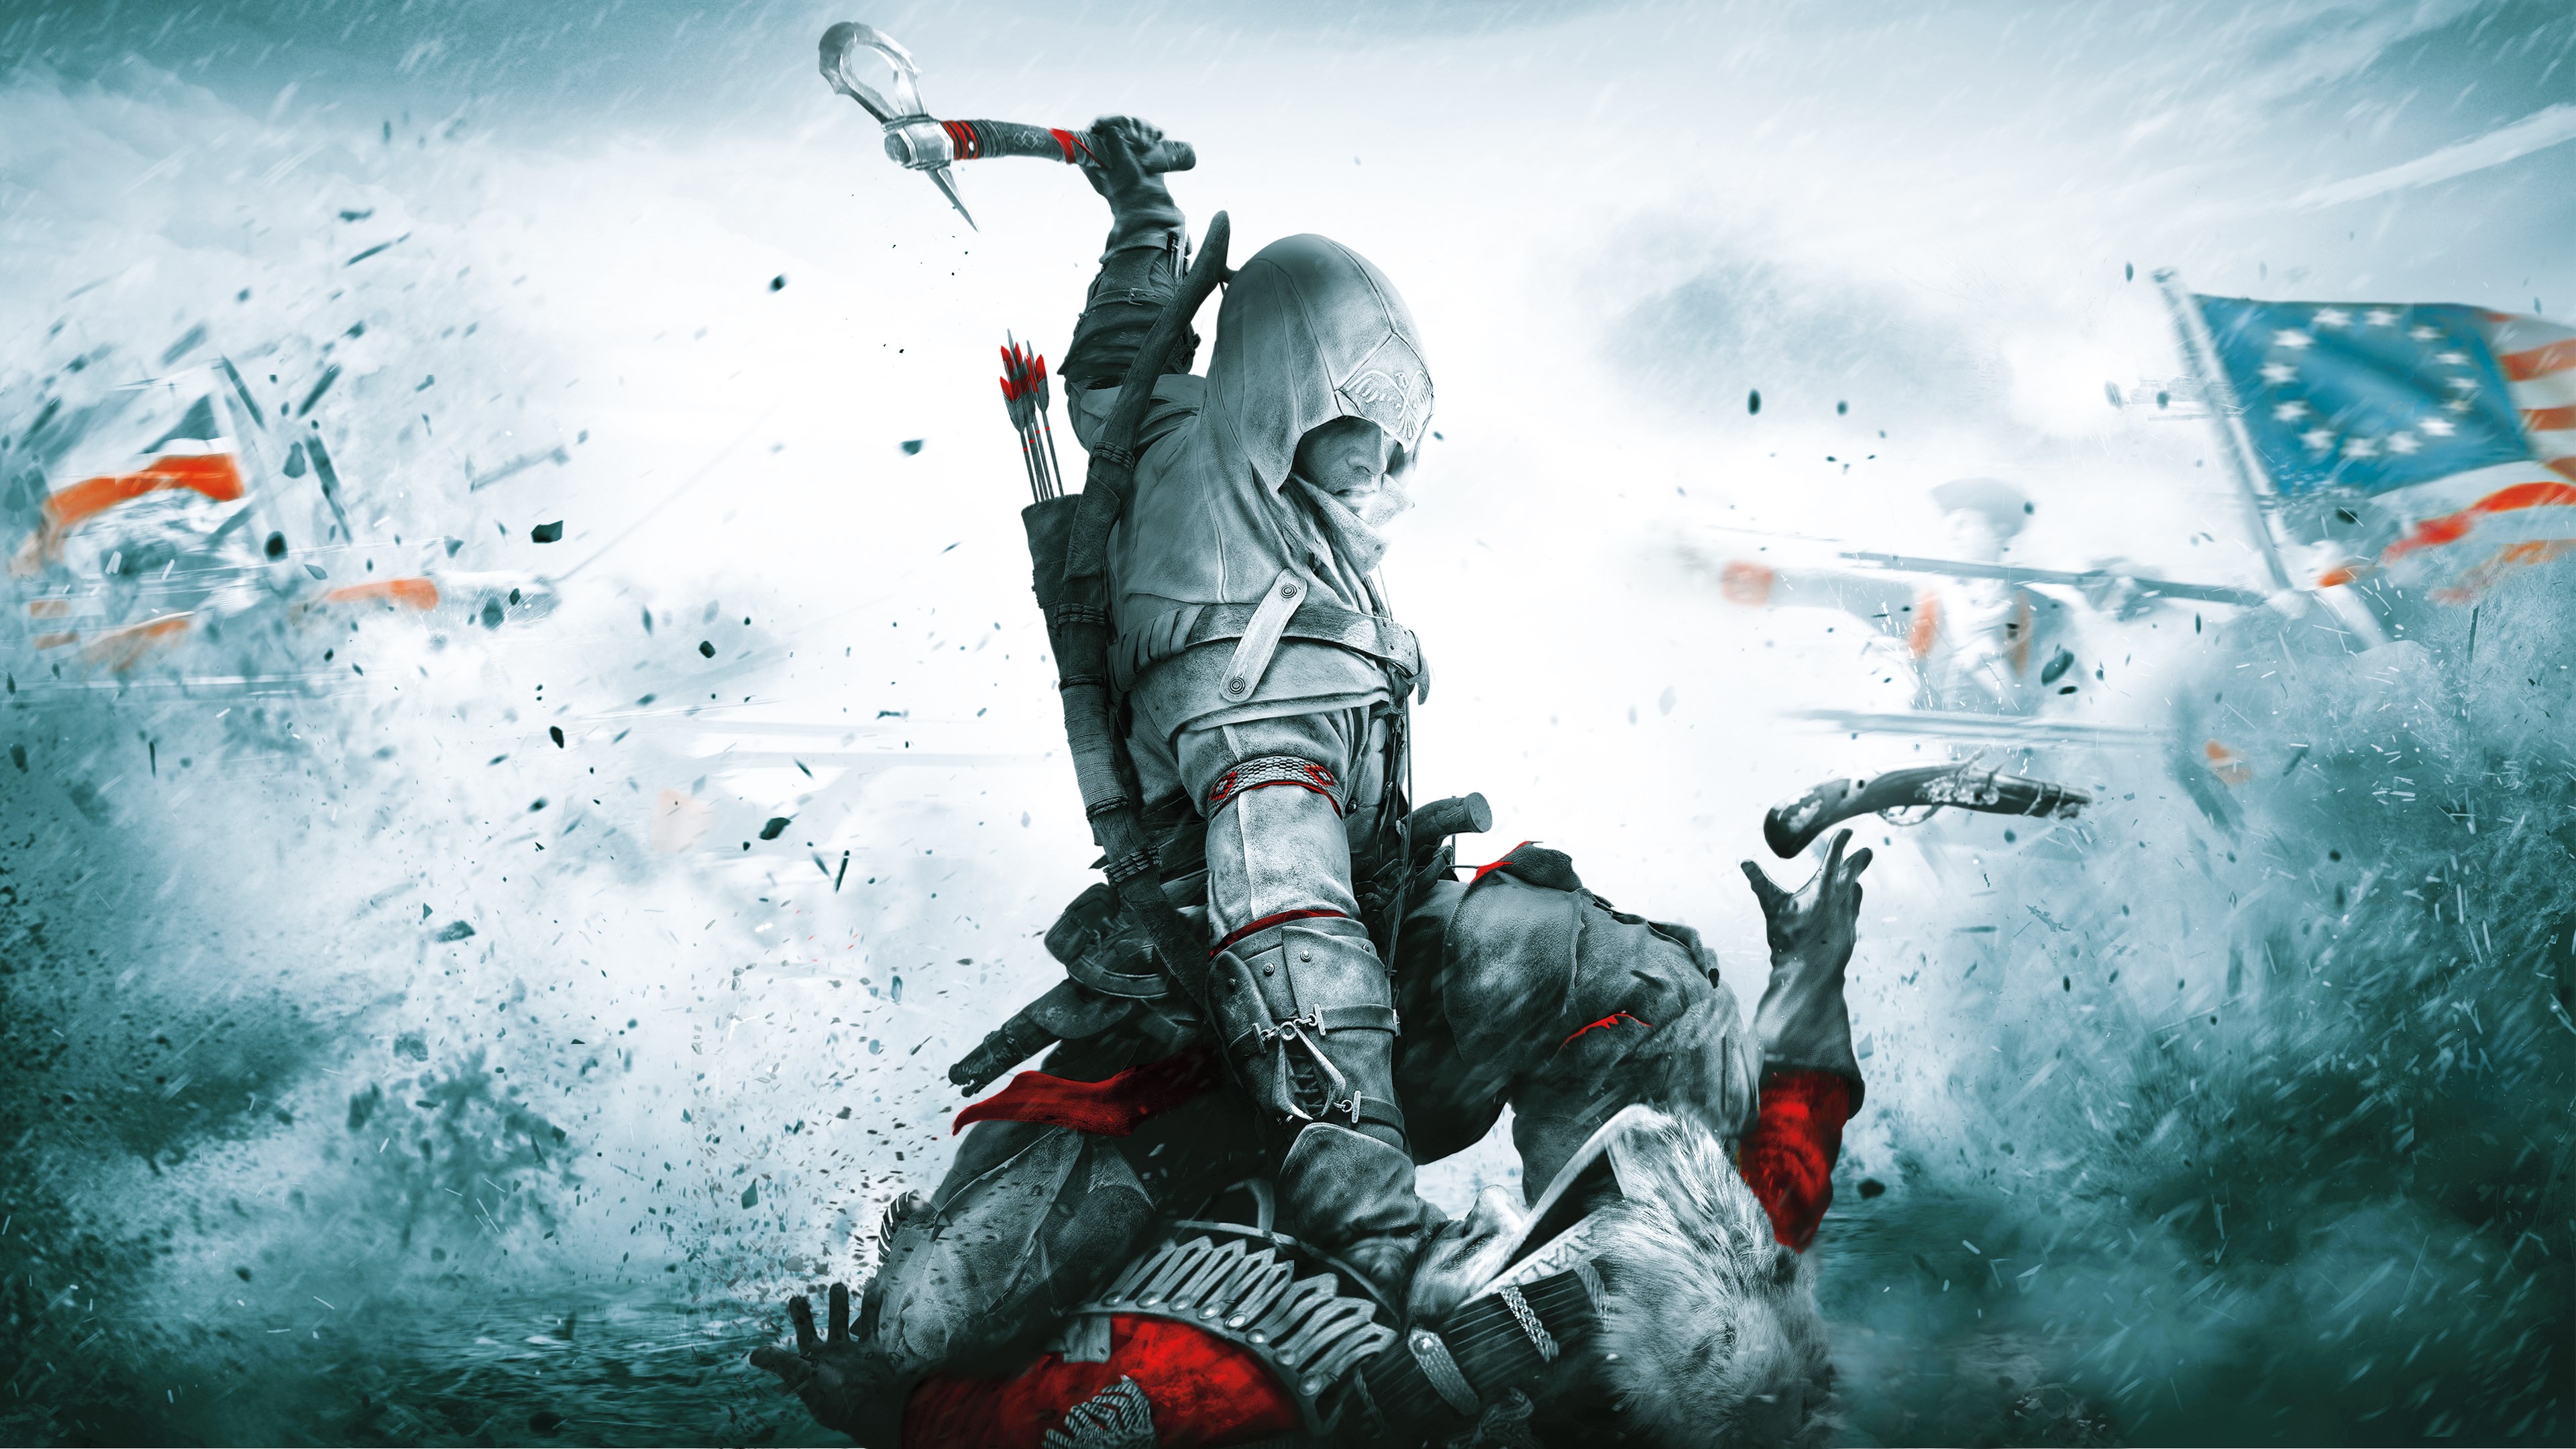 assassin's creed 3 xbox one